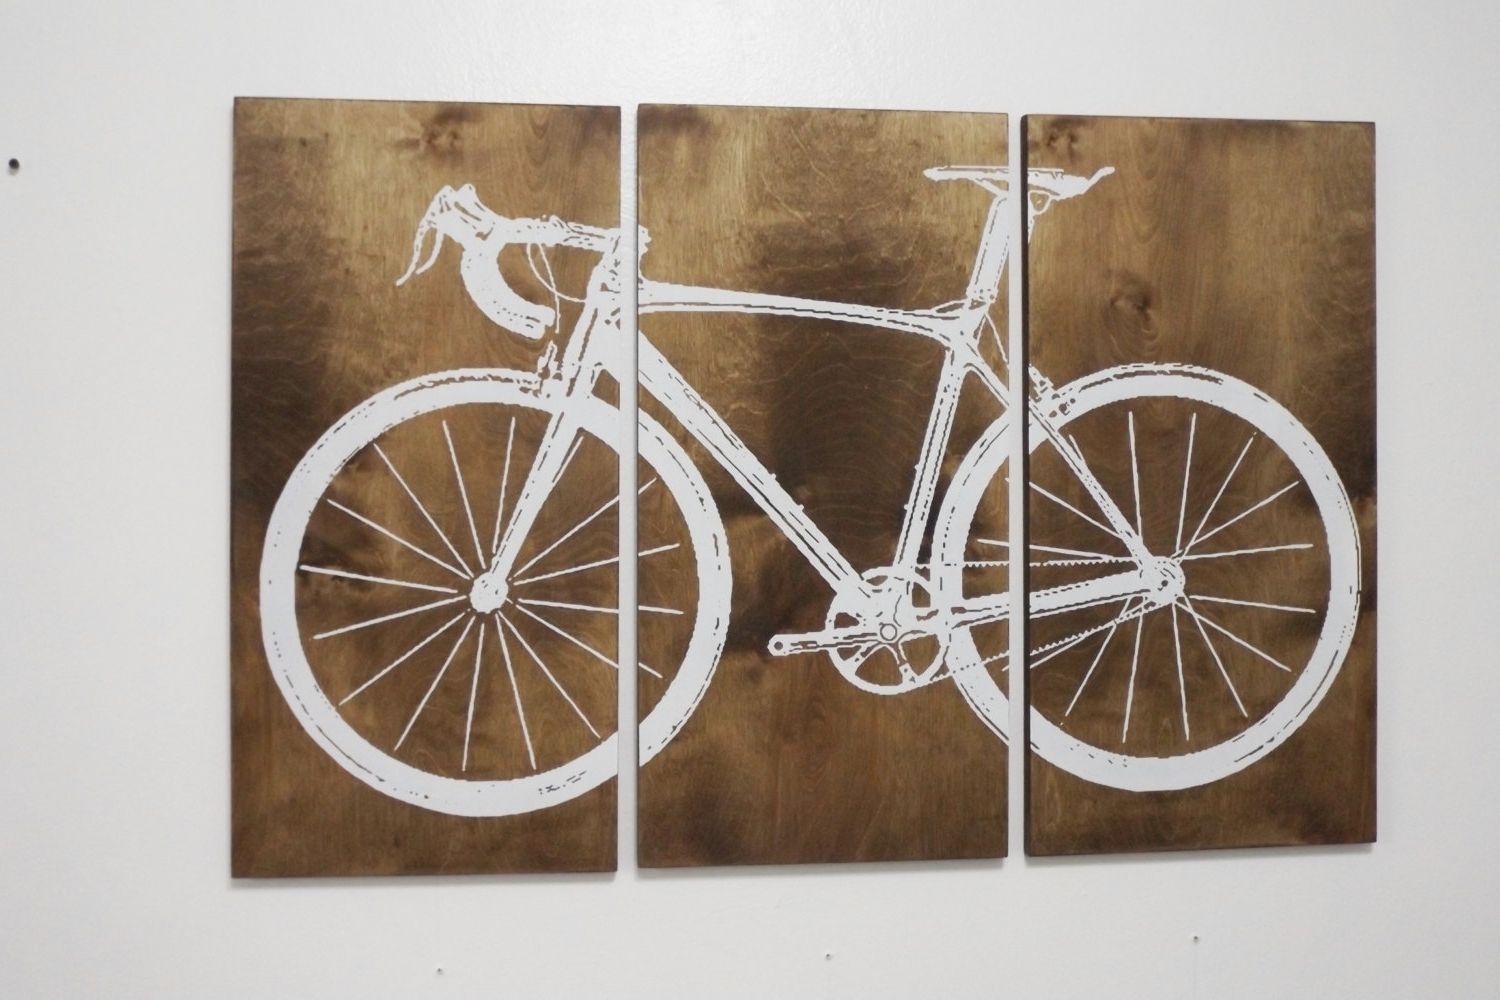 Mesmerizing Bike Wall Art Interior Decor Home 2018 Best Of Metal Intended For Bicycle Wall Art (View 9 of 20)